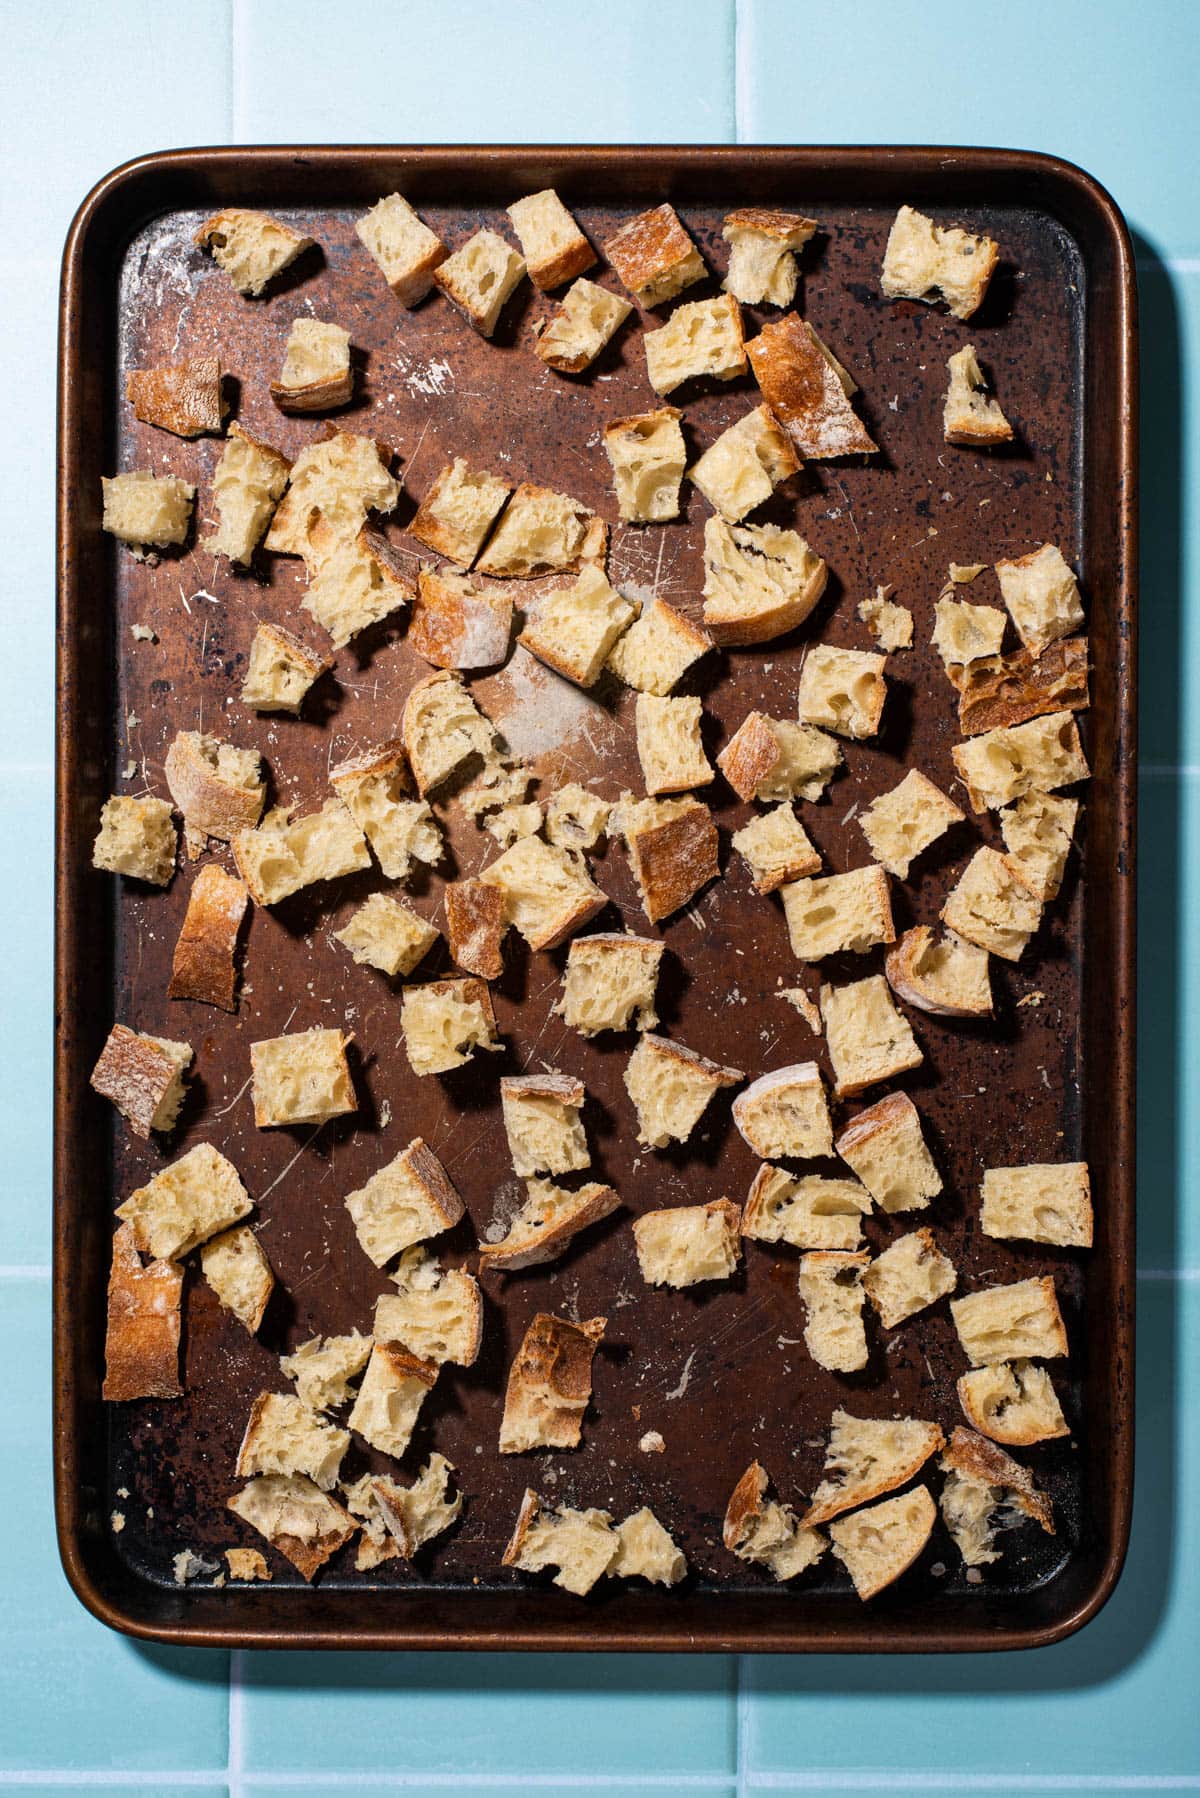 Toasted cubes of ciabatta on a baking sheet.